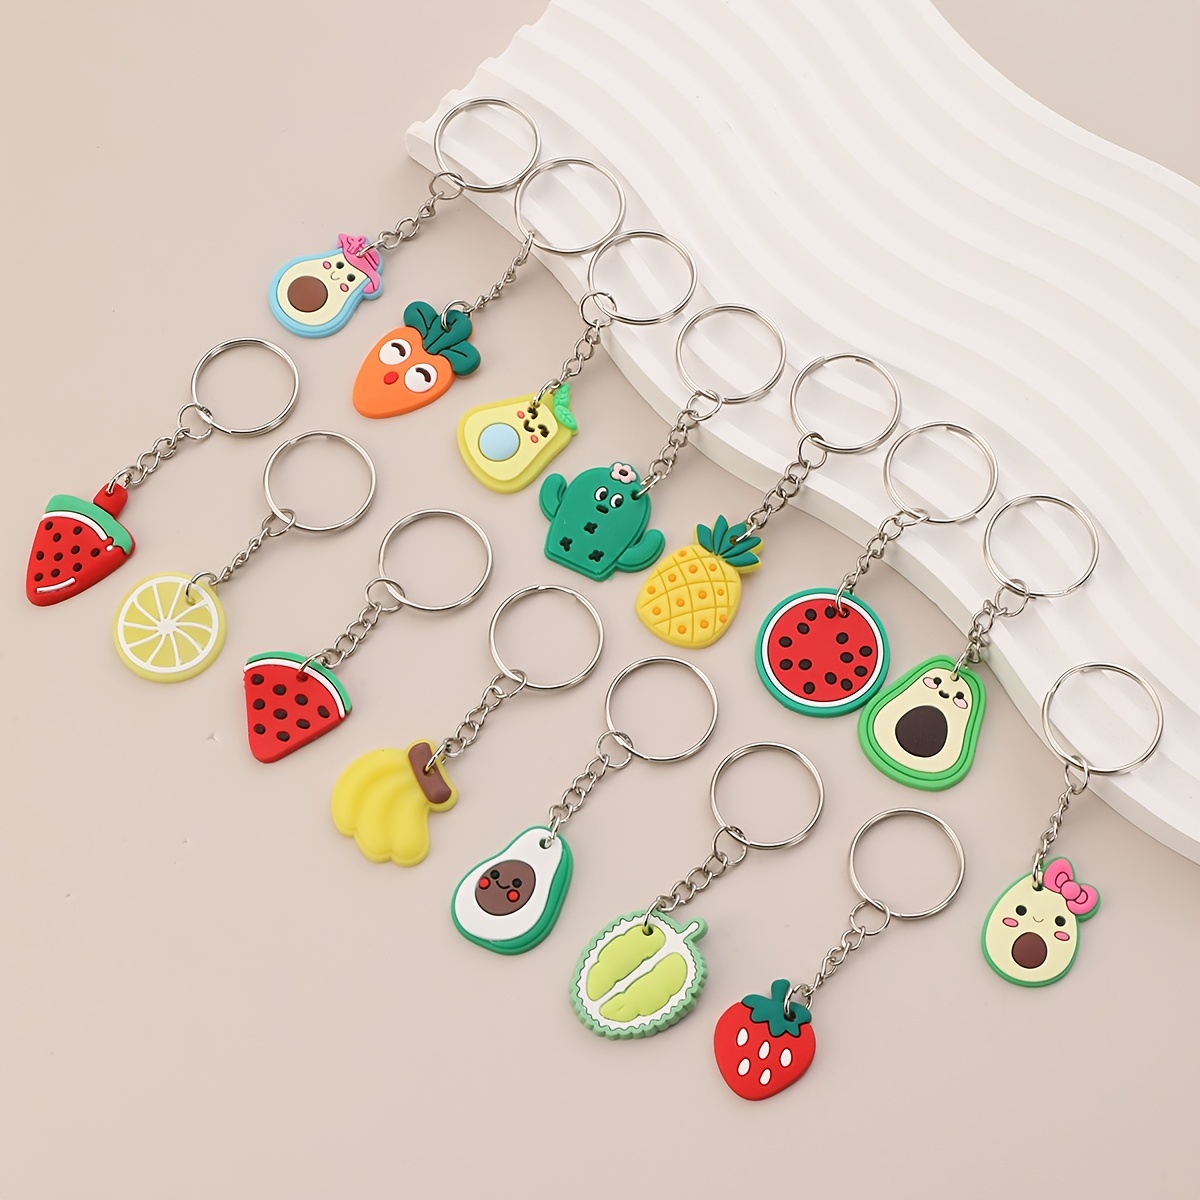 EJWQWQE Fast Food Keychains For Kids, , Cool Keychain Accessories,  Keychains For Boys And Girls, Food Party Favors 